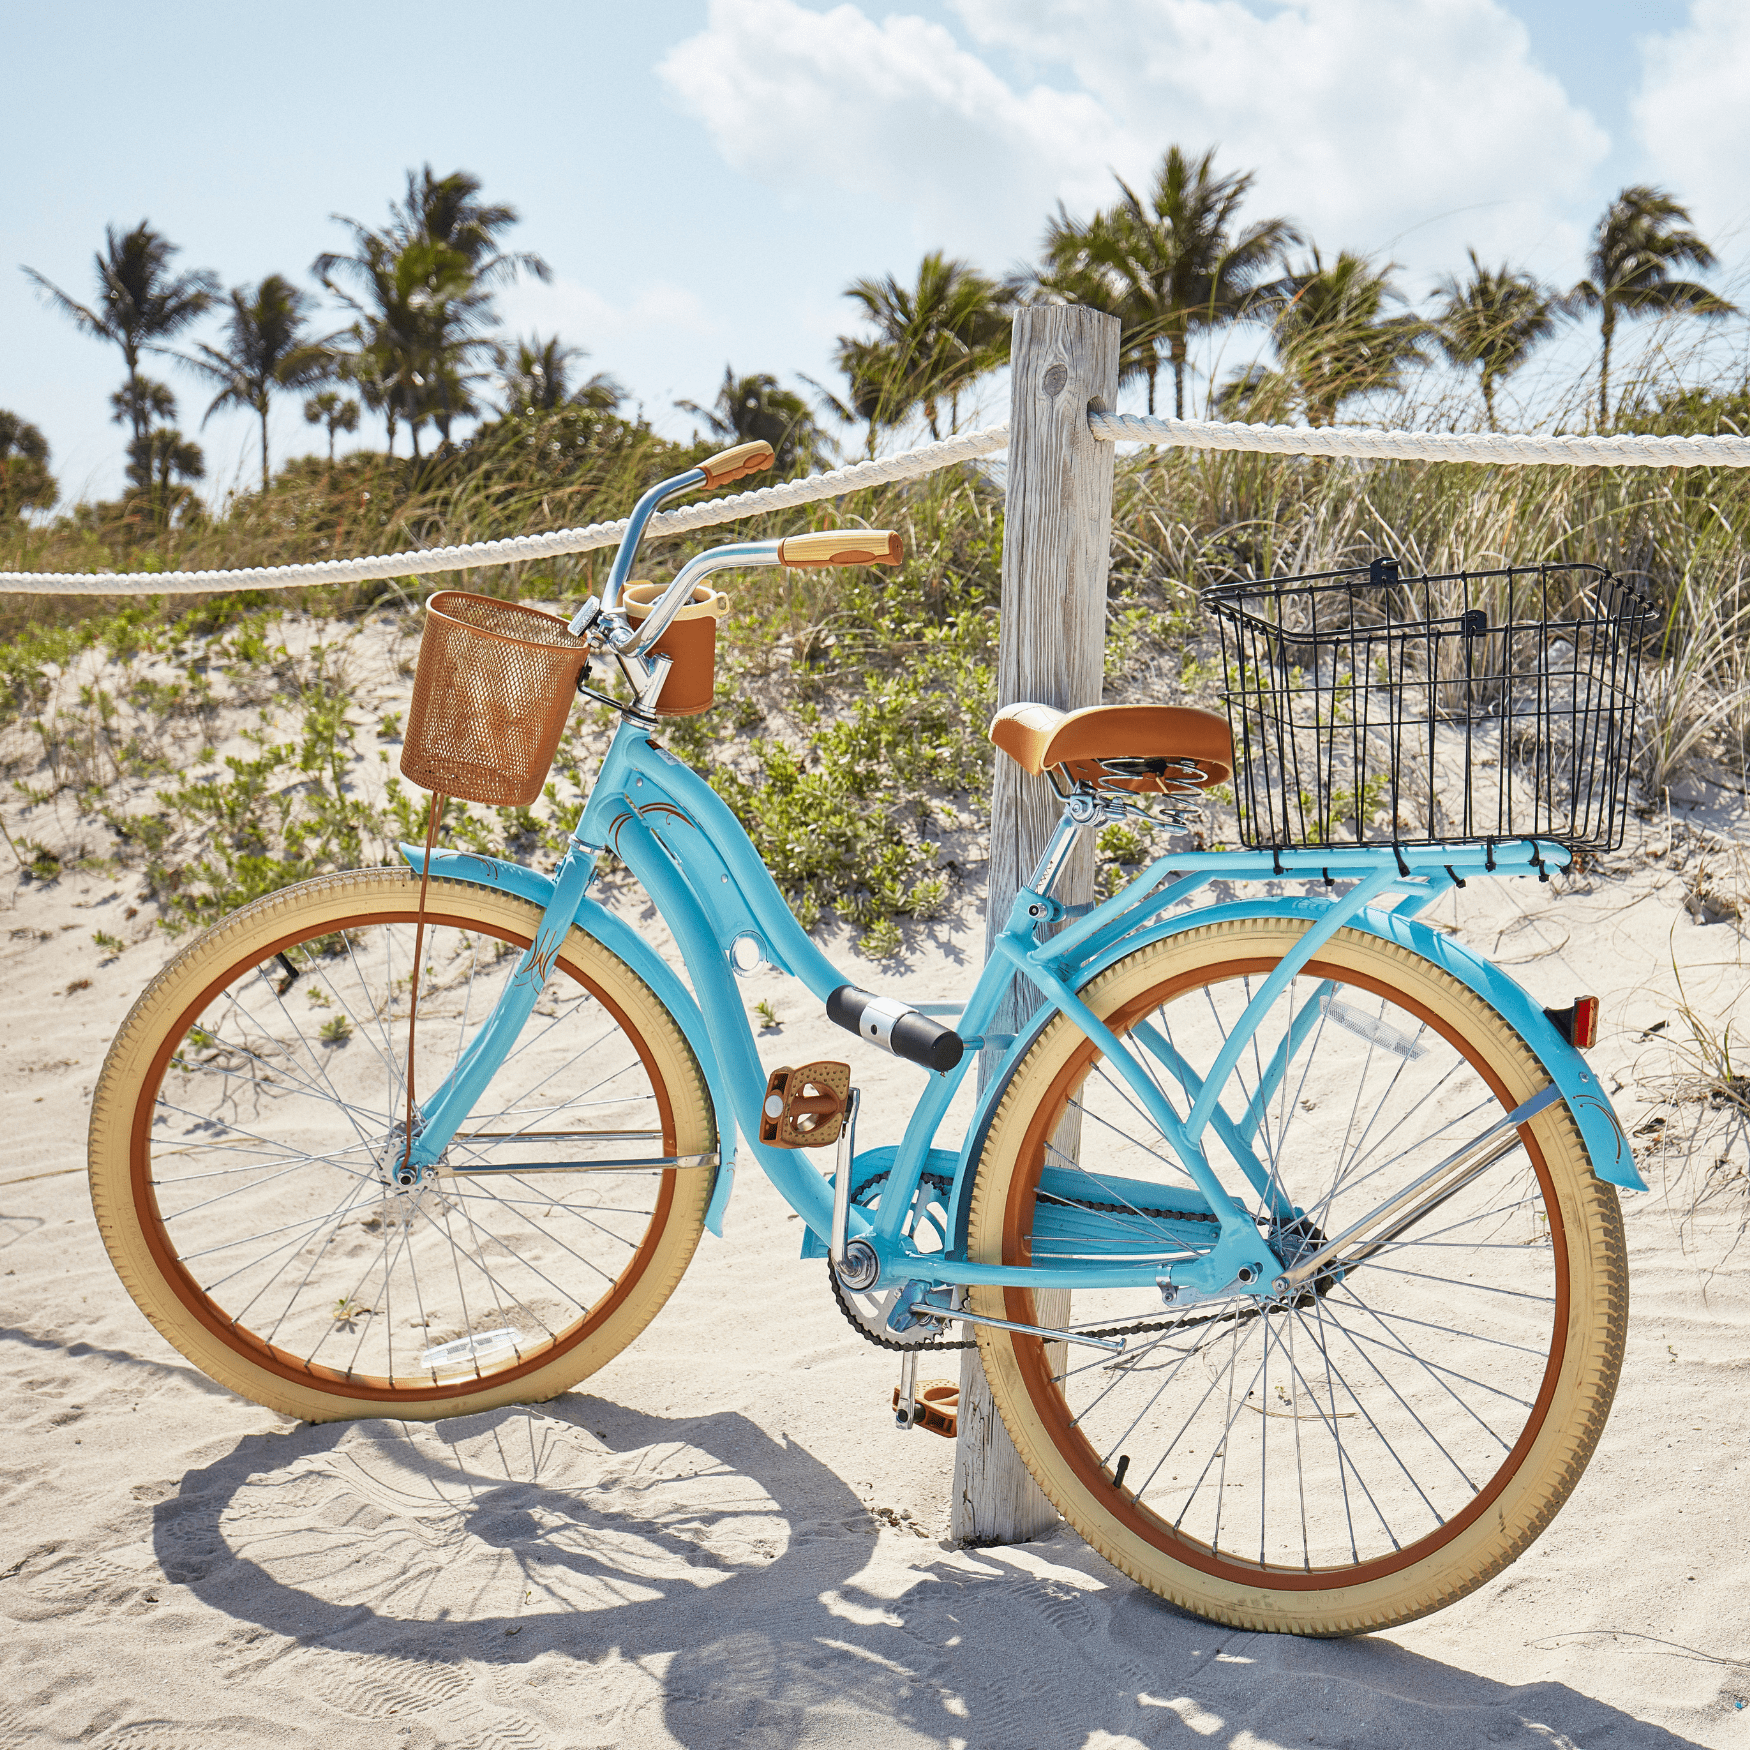 Blue and tan bike on the beach, leaning up against a fence post.